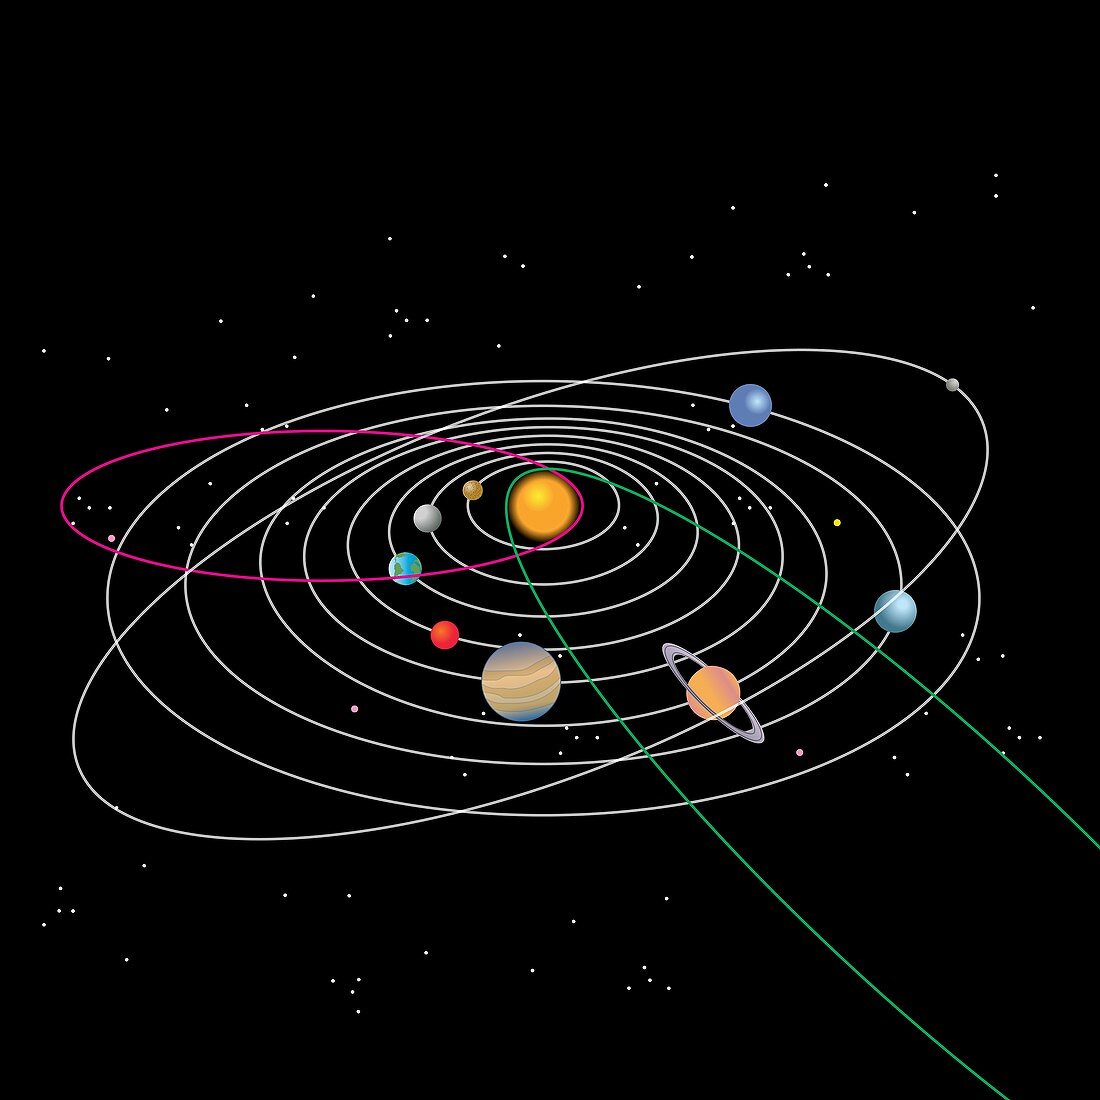 Solar system and paths of comets, illustration